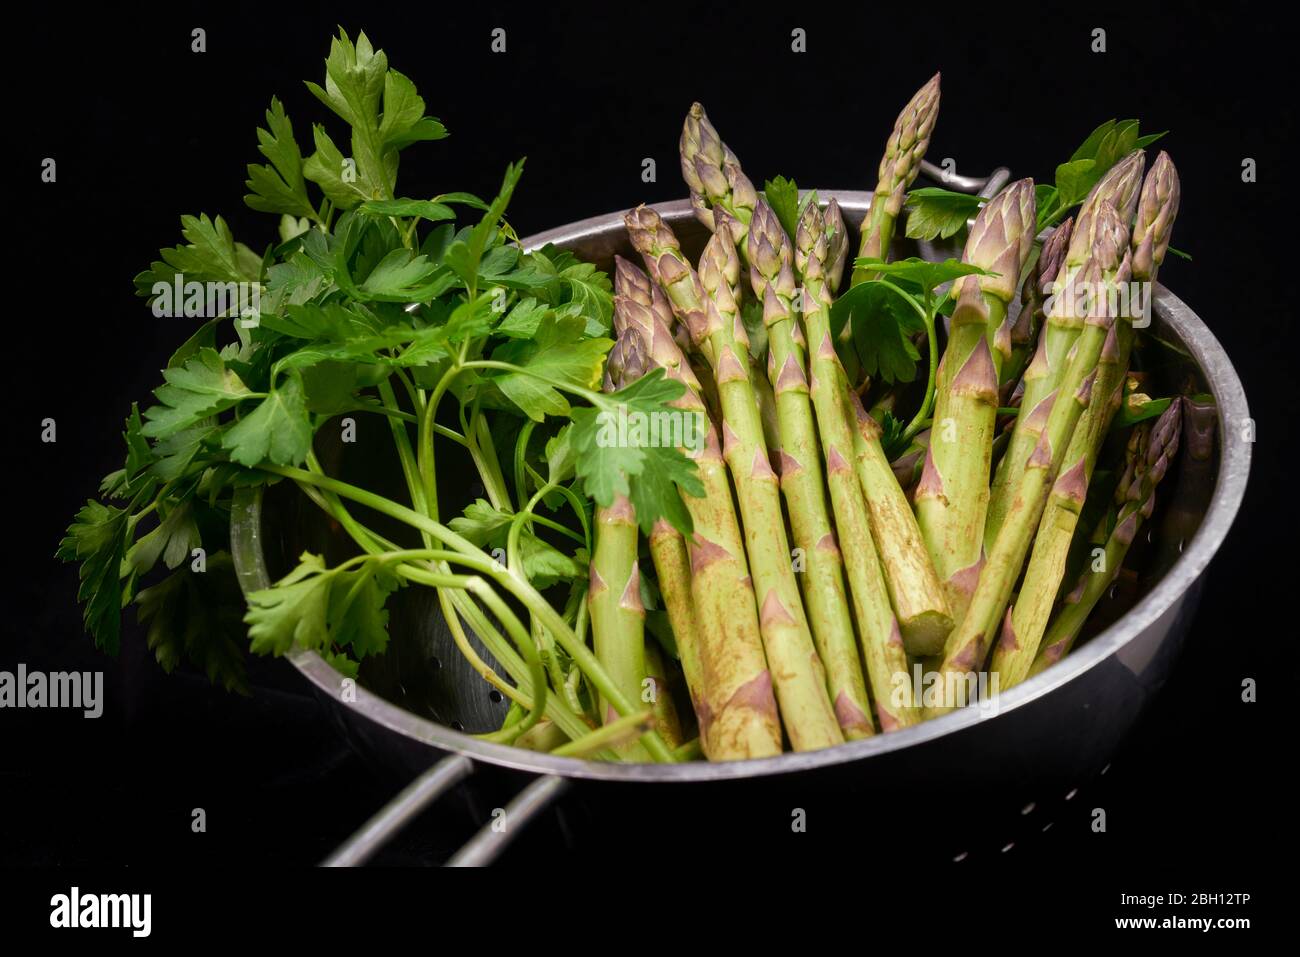 green asparagus cut on black background Stock Photo